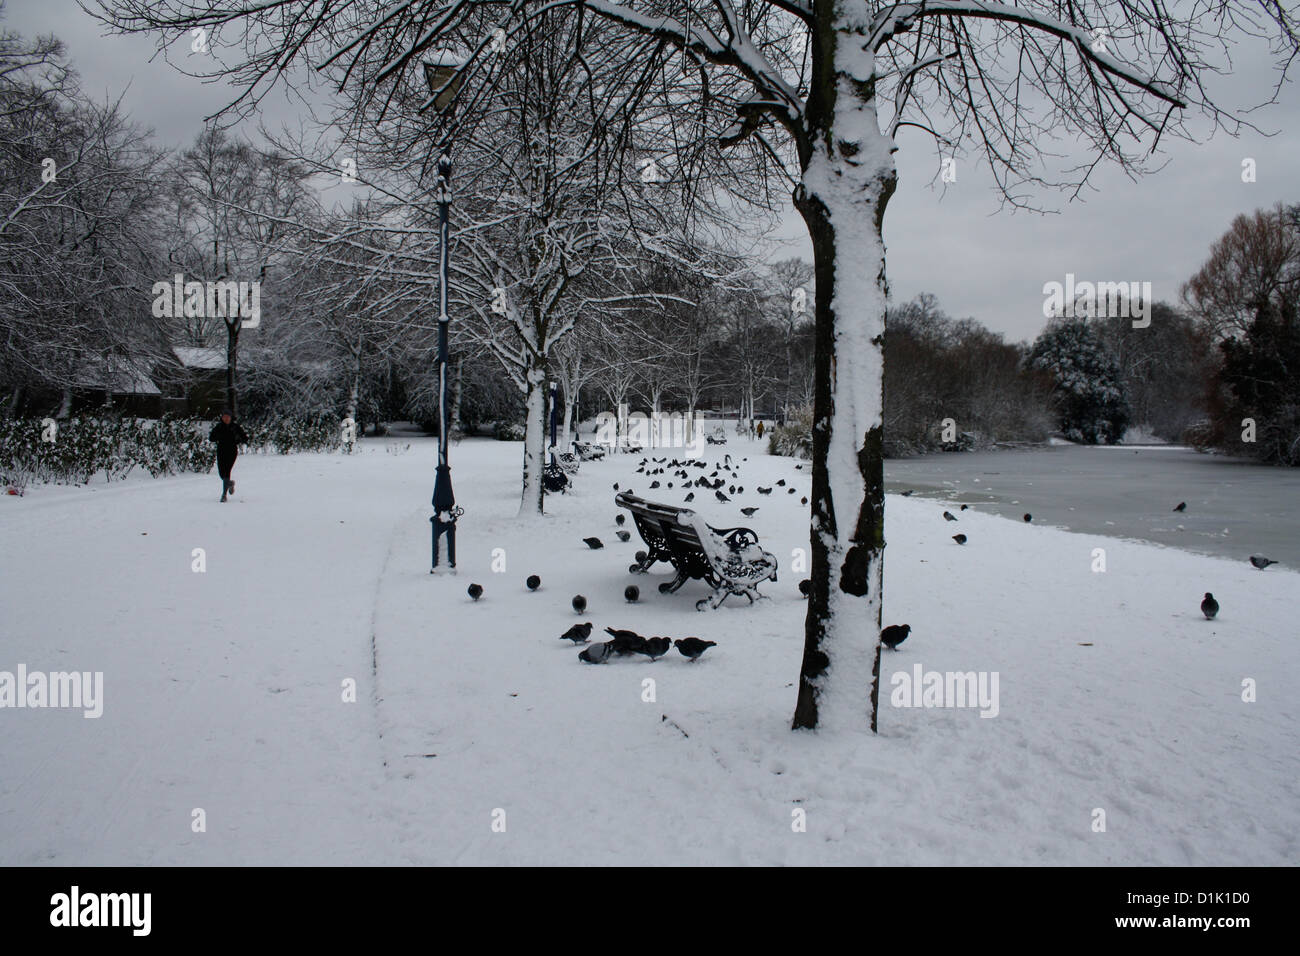 A runner in Victoria Park, east London during a snowy winter Stock Photo